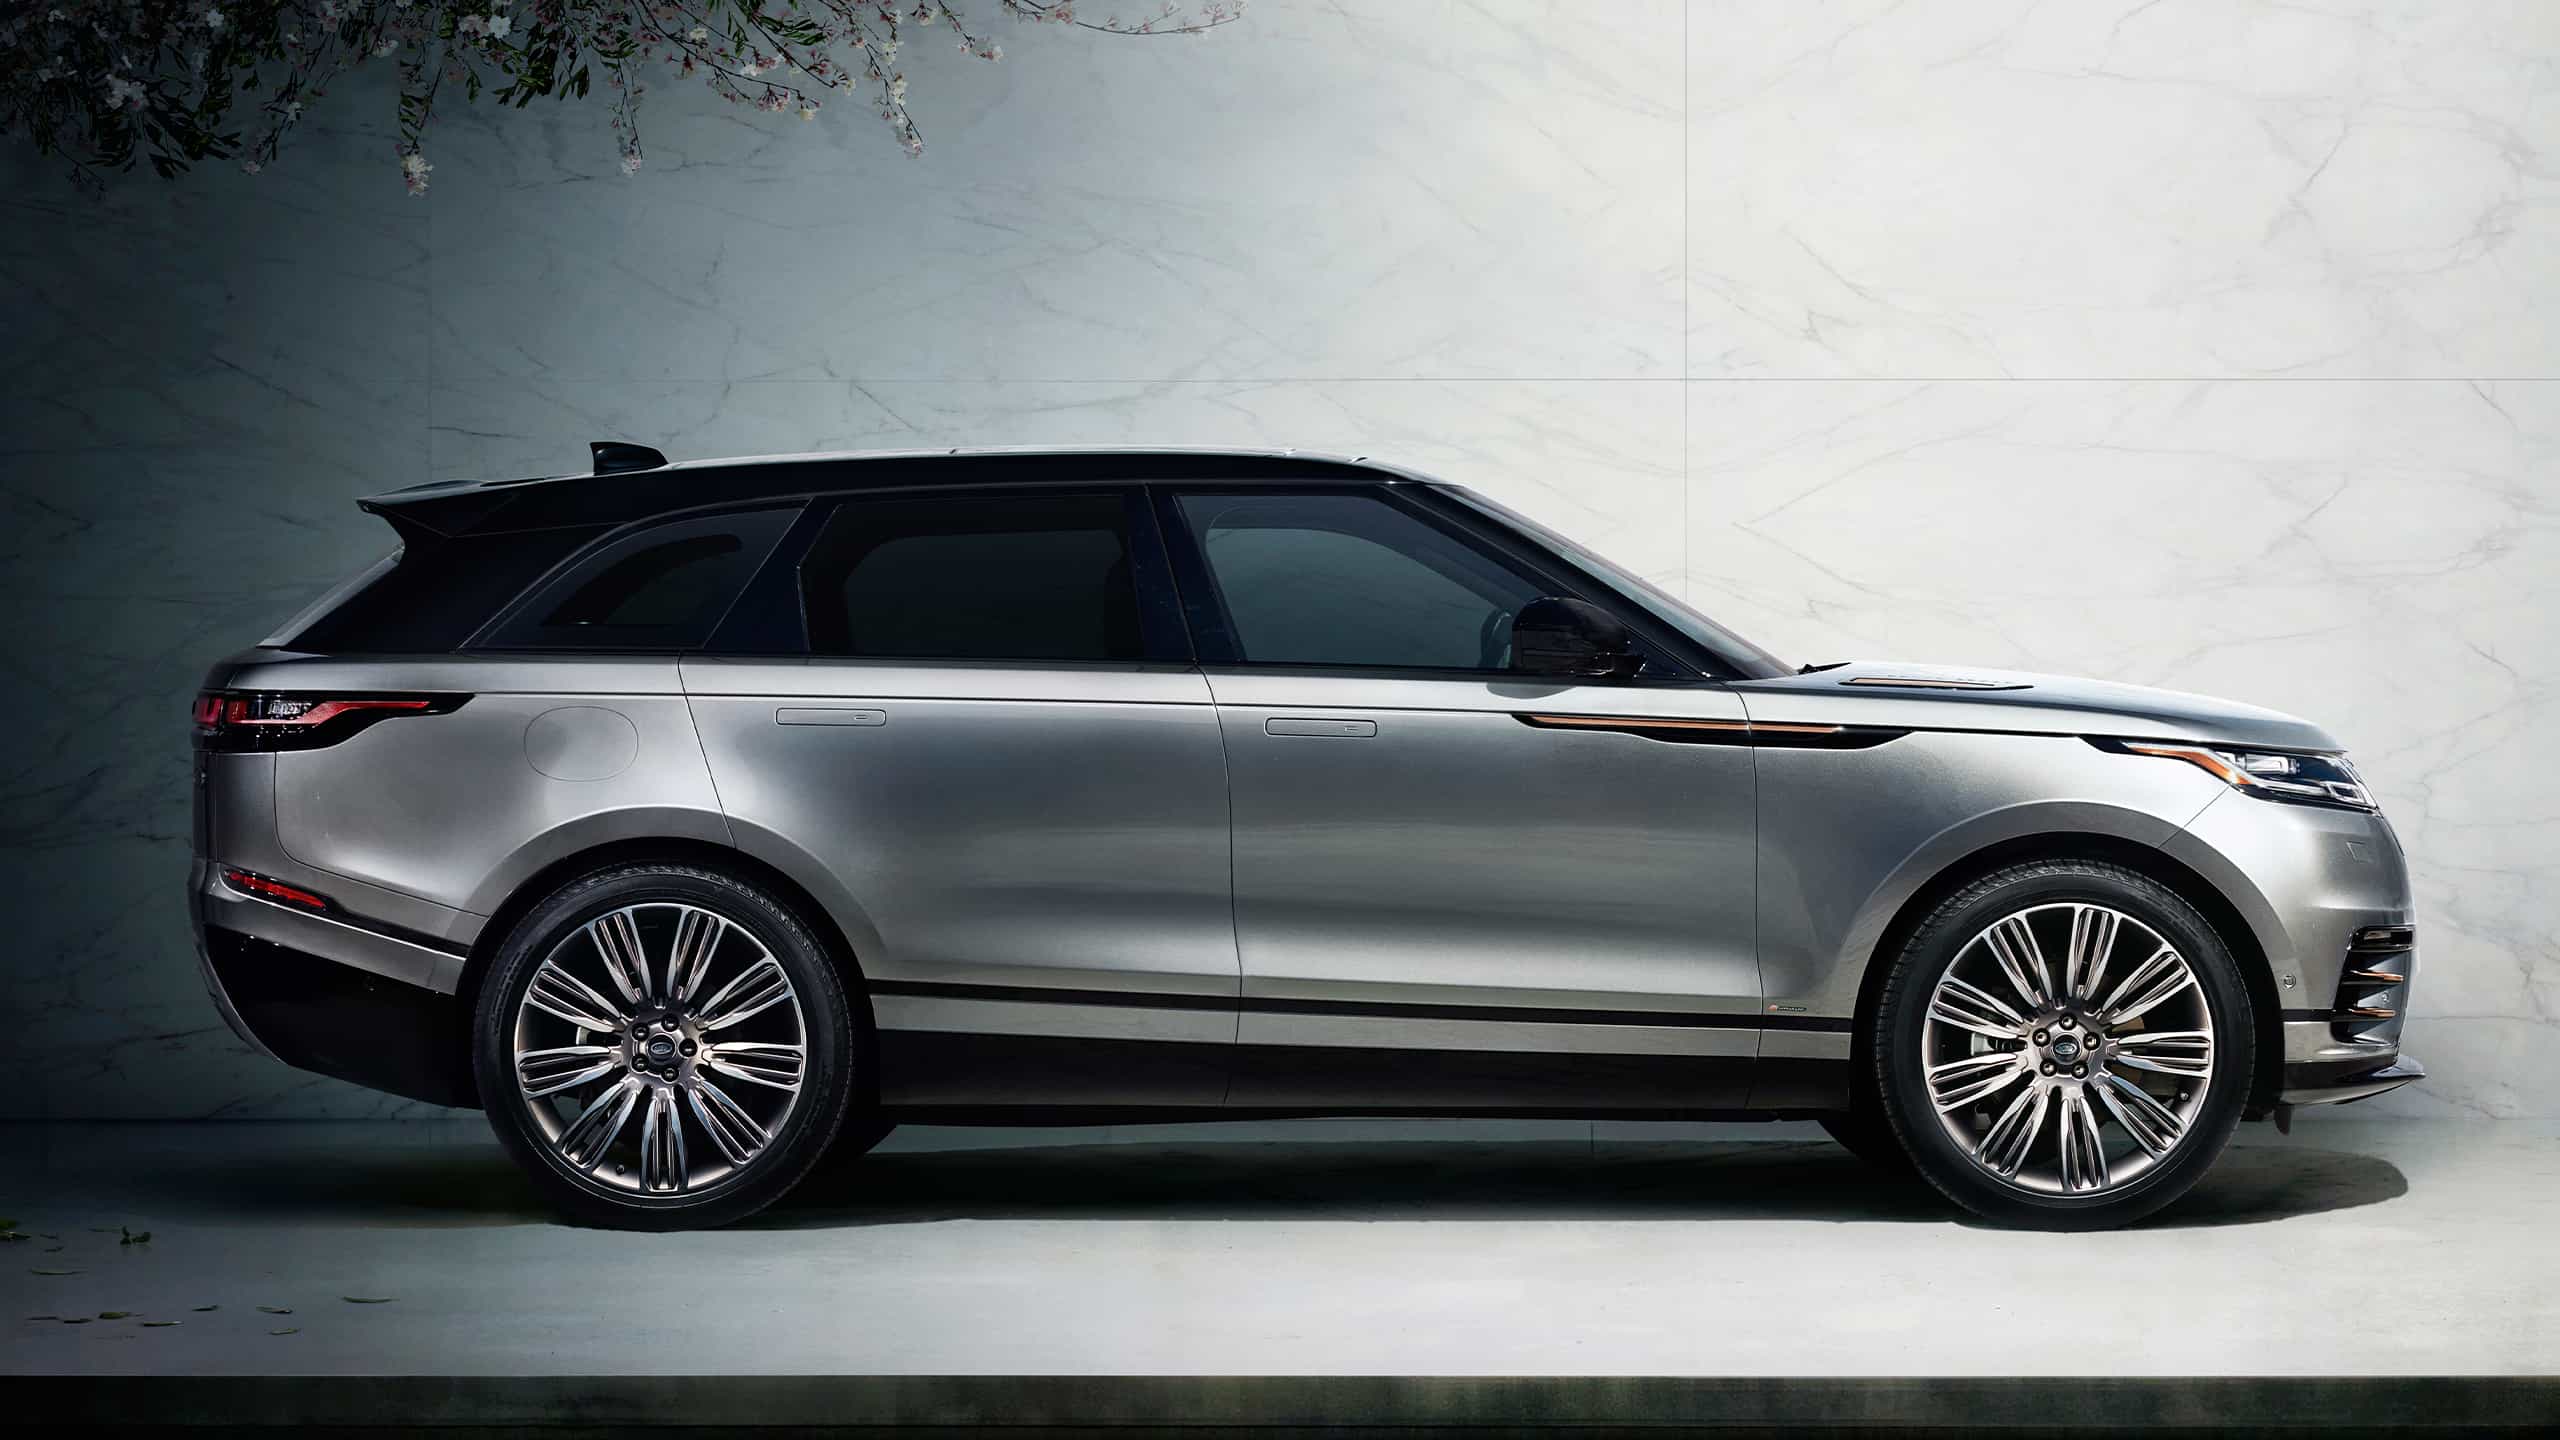 Velar Side Profile Presented During The Launch